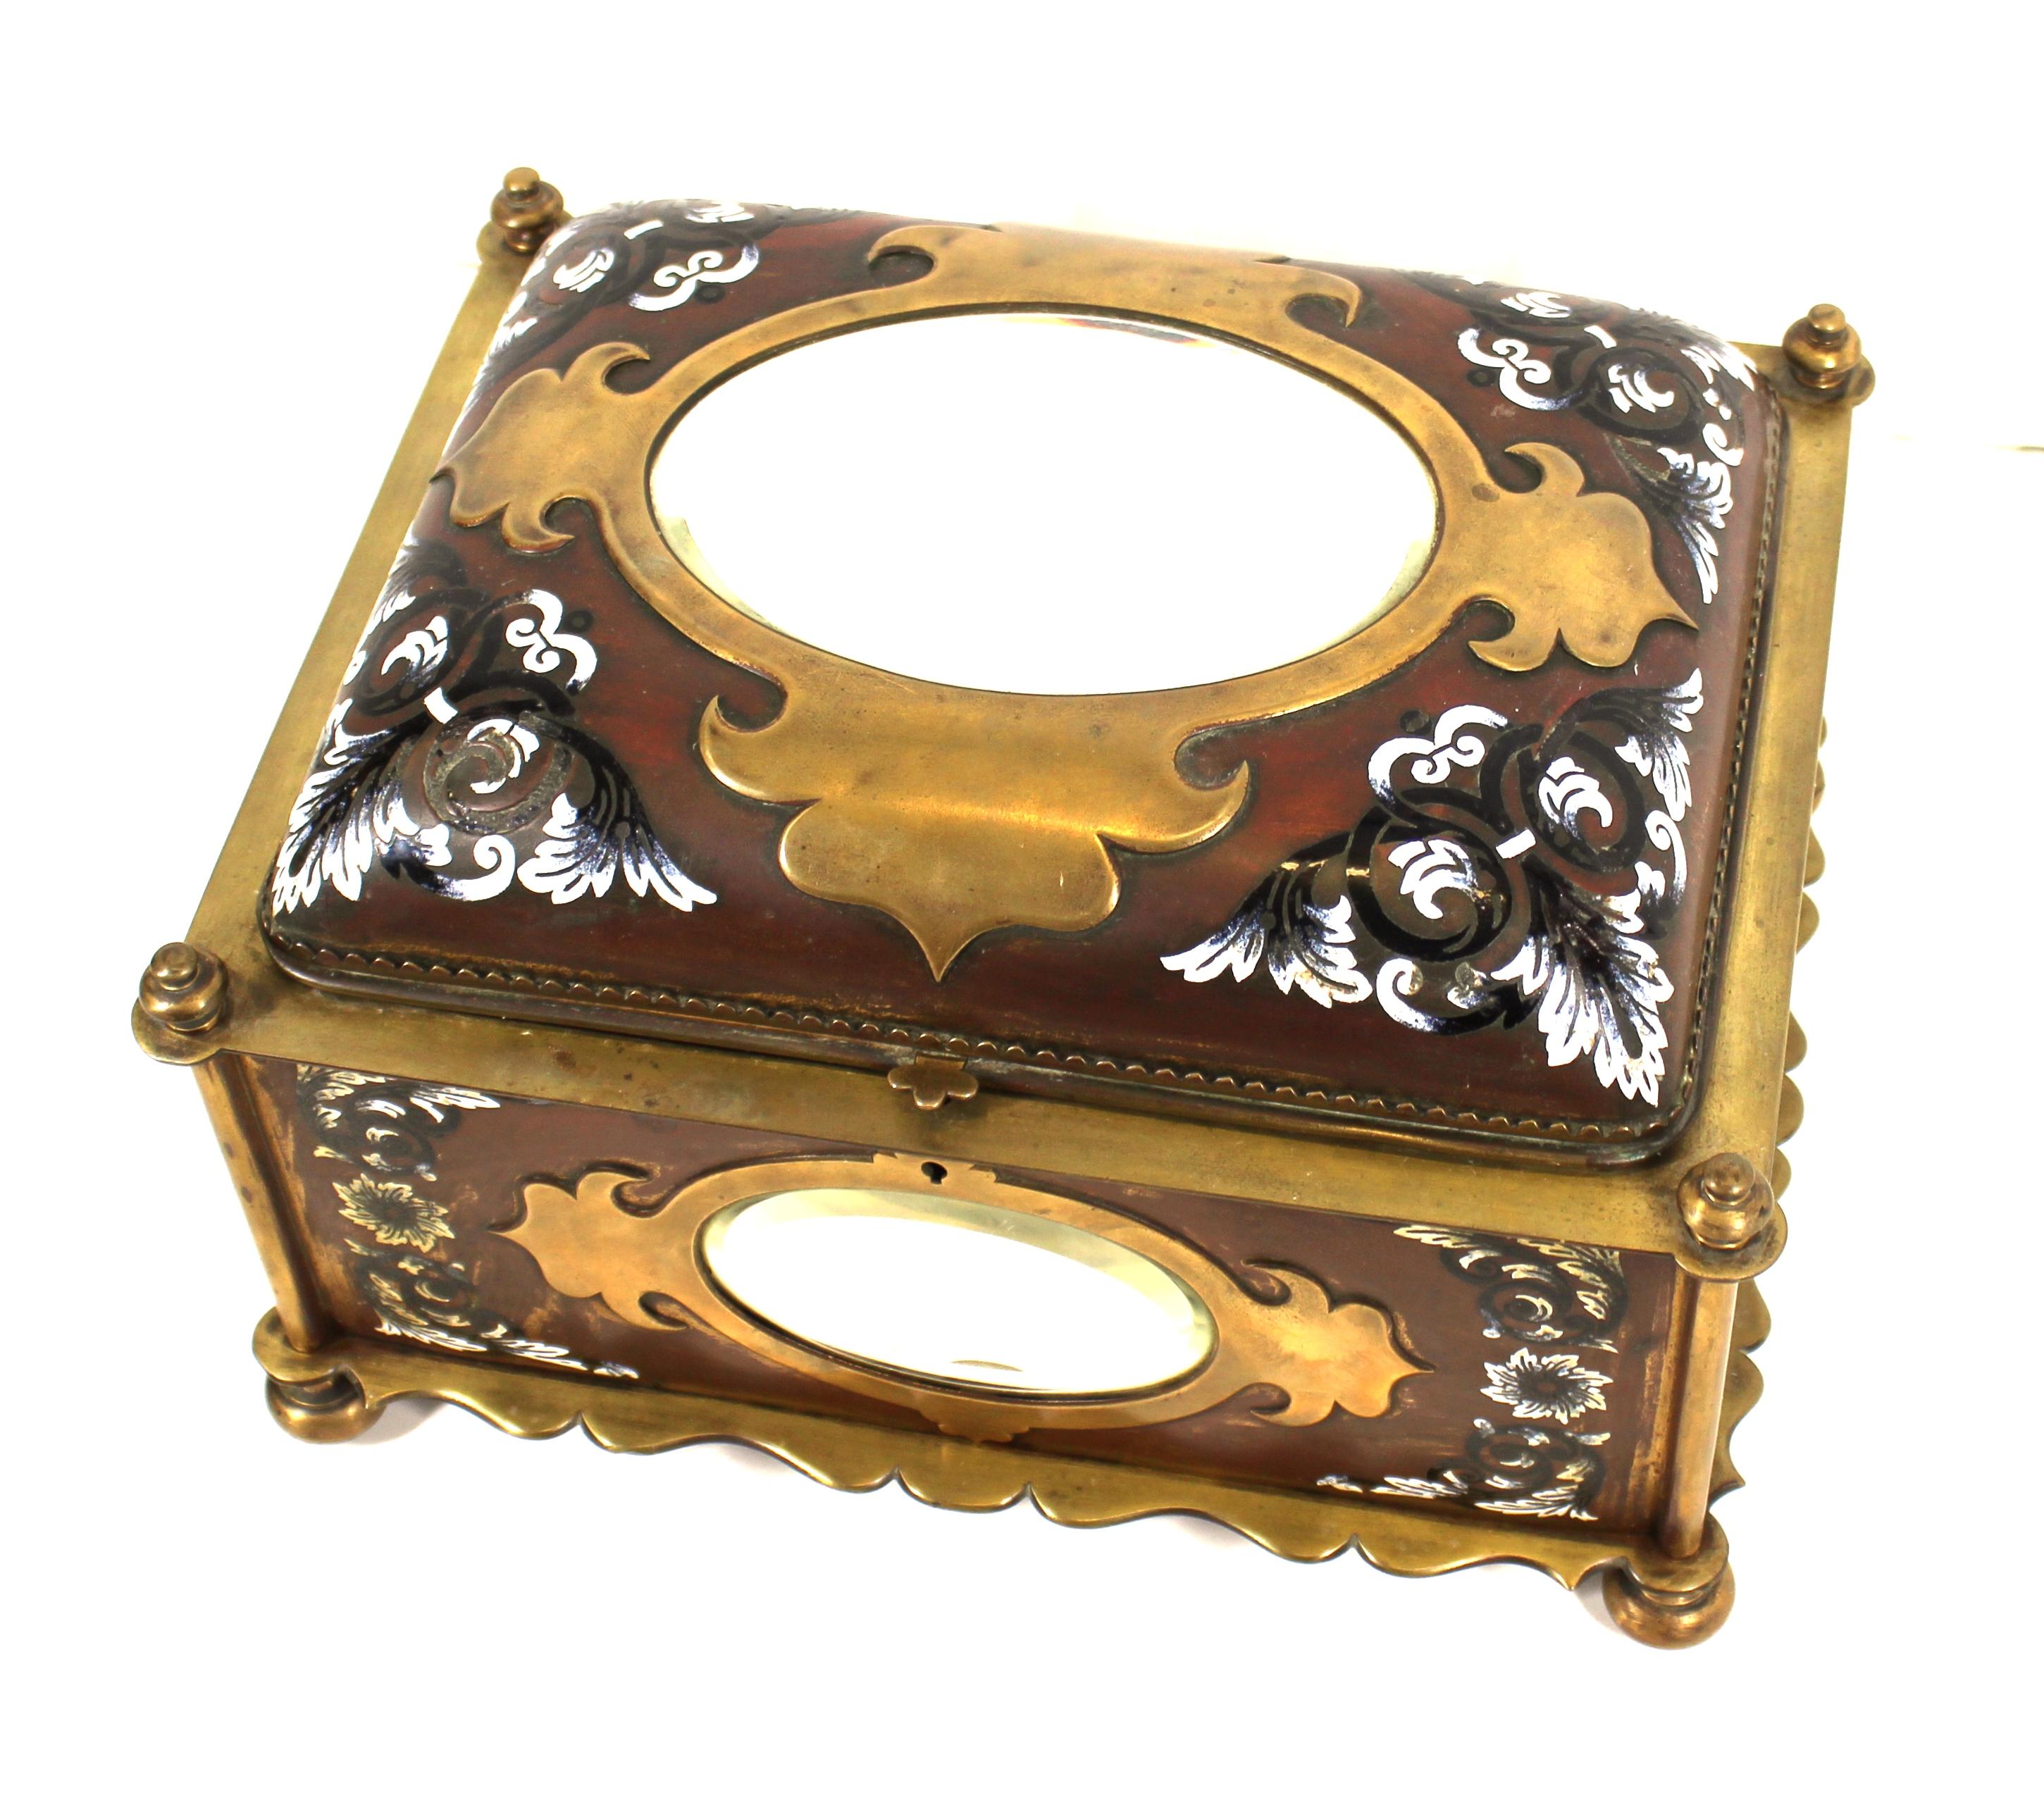 French Renaissance Revival champleve enamel jewelry box with oval beveled mirror inserts. Handmade in France during the mid-19th century. The piece has velvet interior lining and decorative floral enamel elements. In great antique condition with